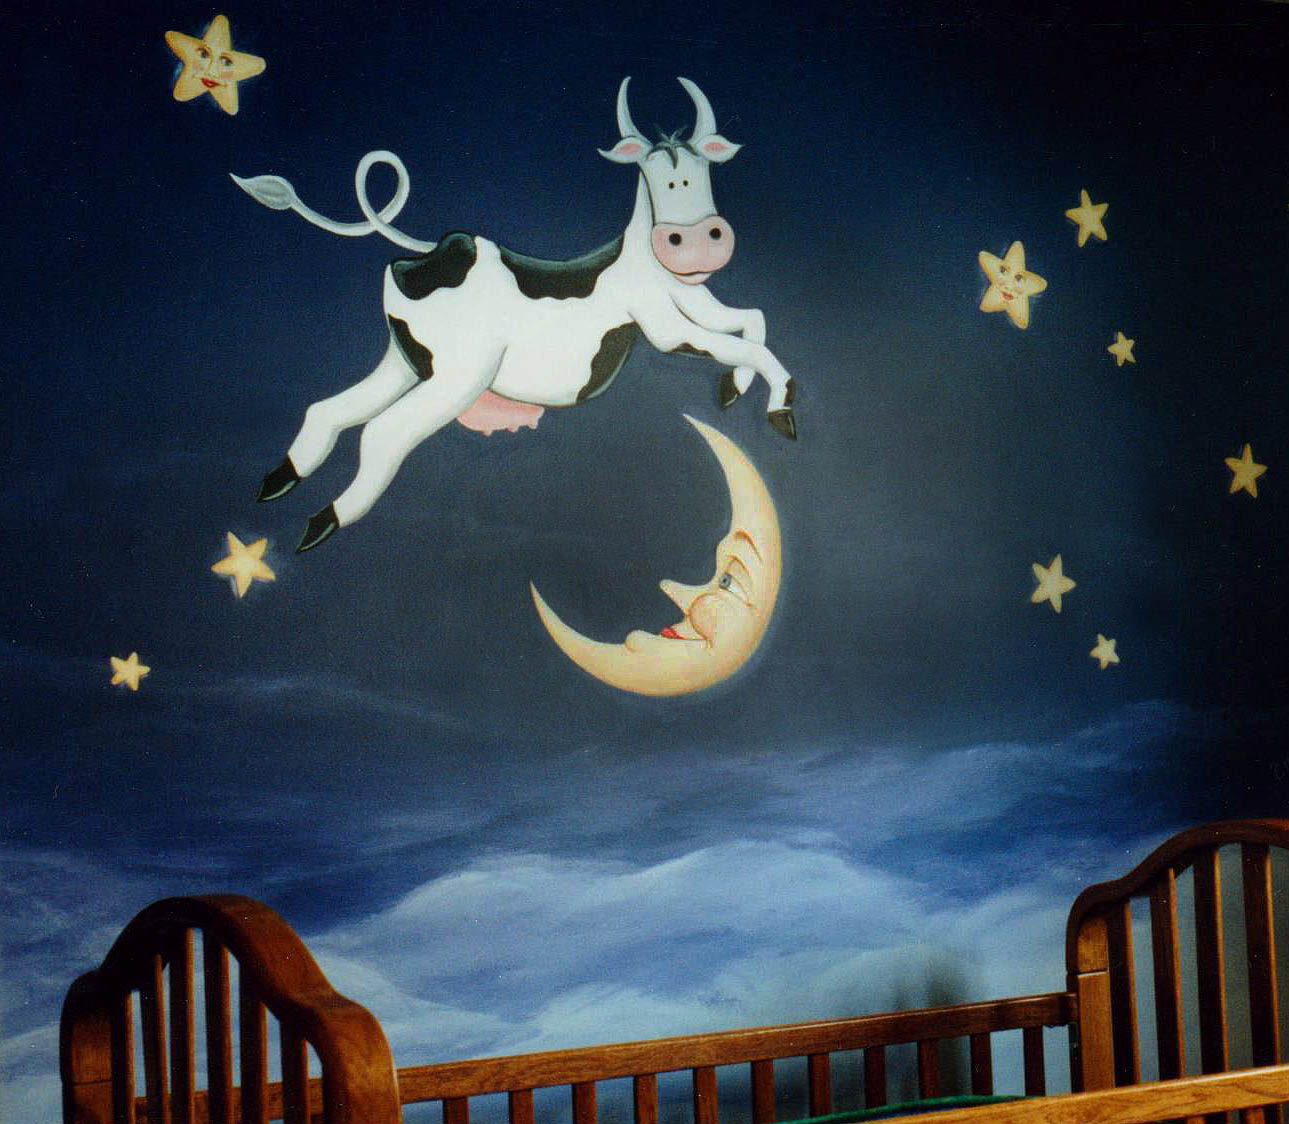 Cow Jumped Over Moon Mural 001.jpg